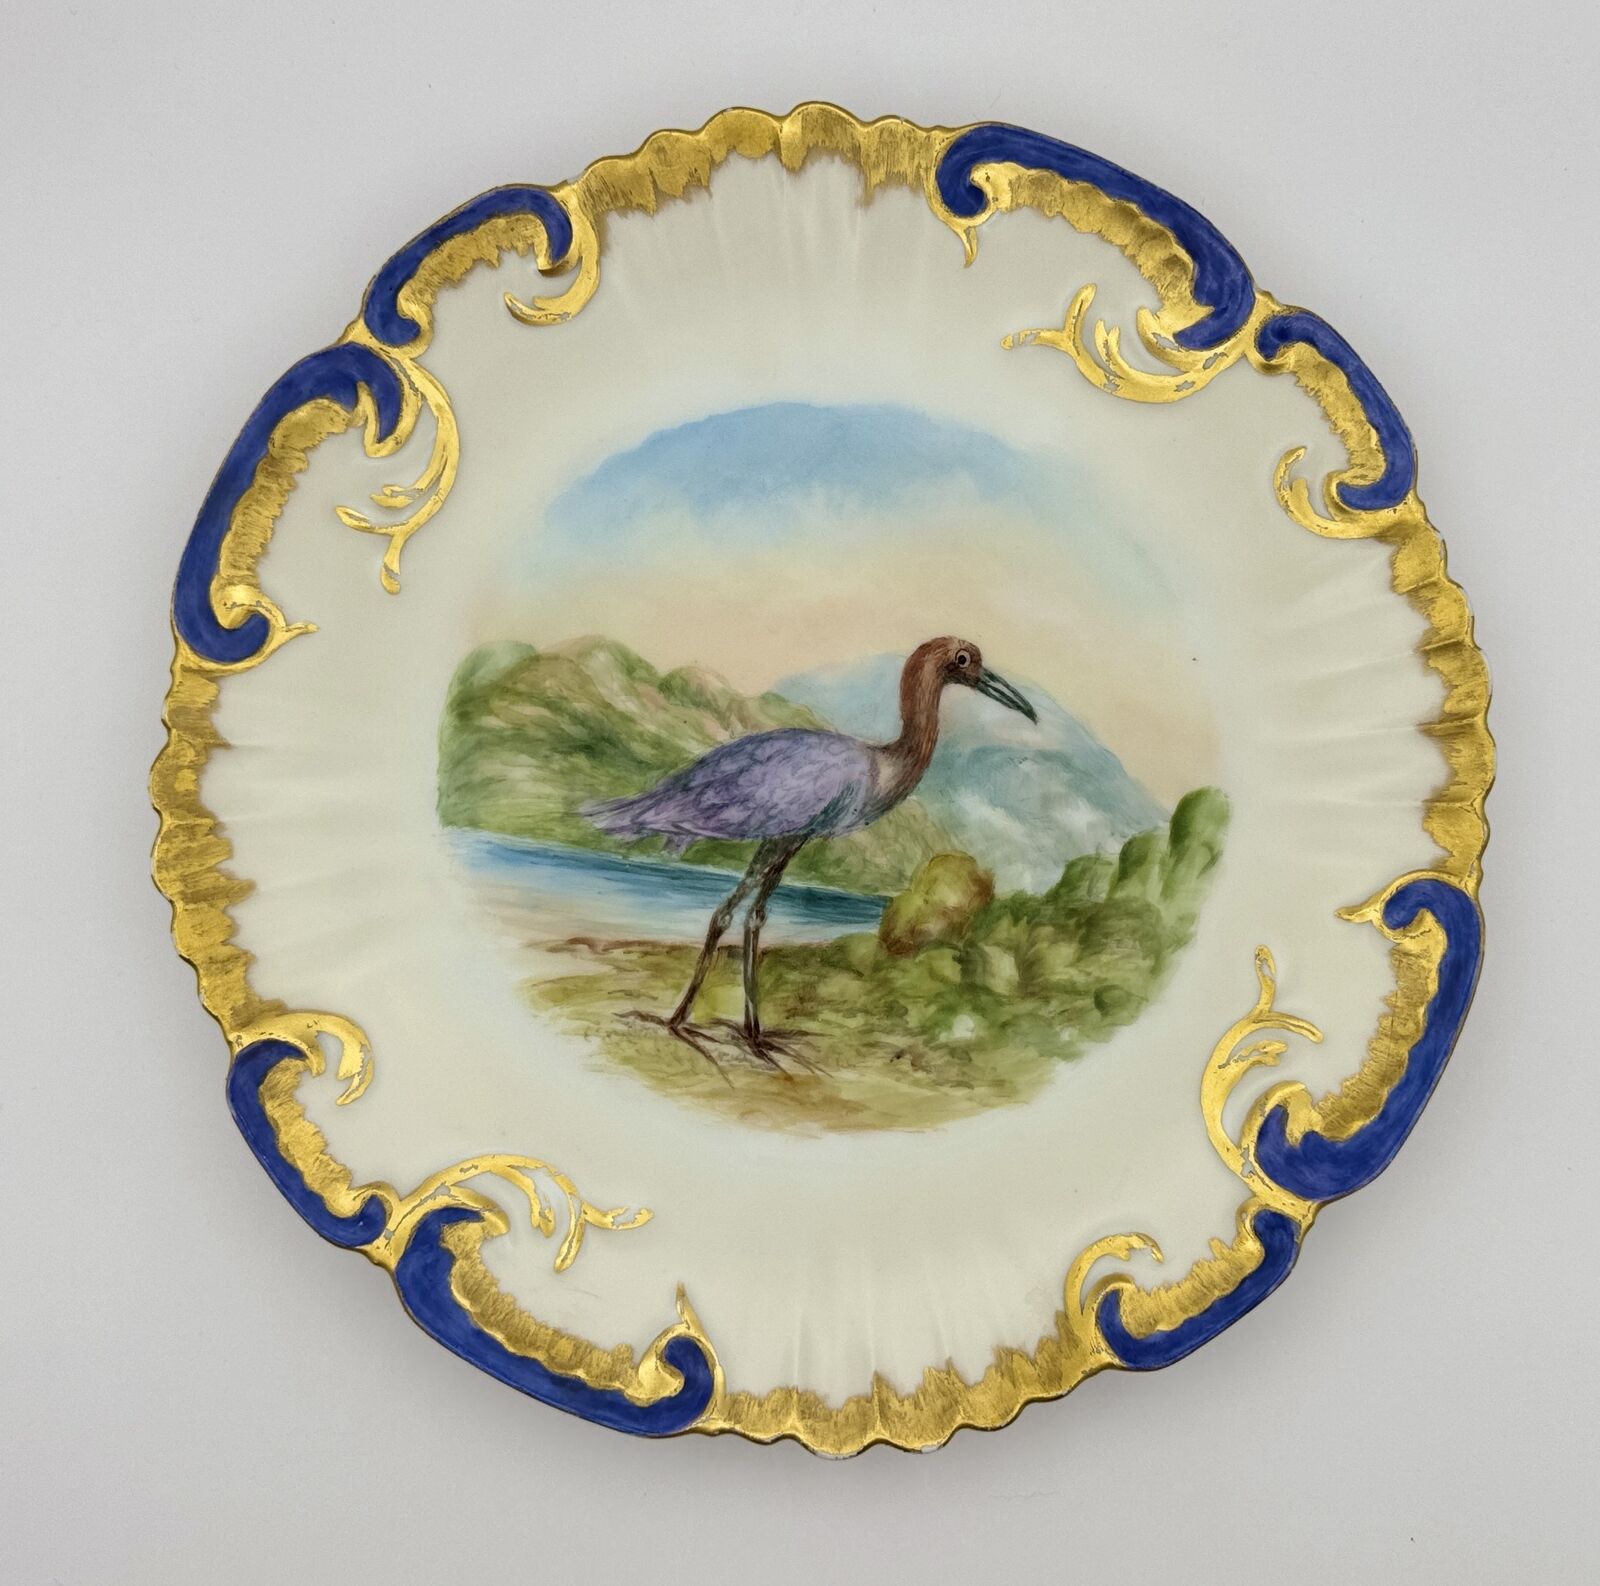 Rare Limoges Hand-Painted Plate with Blue Heron